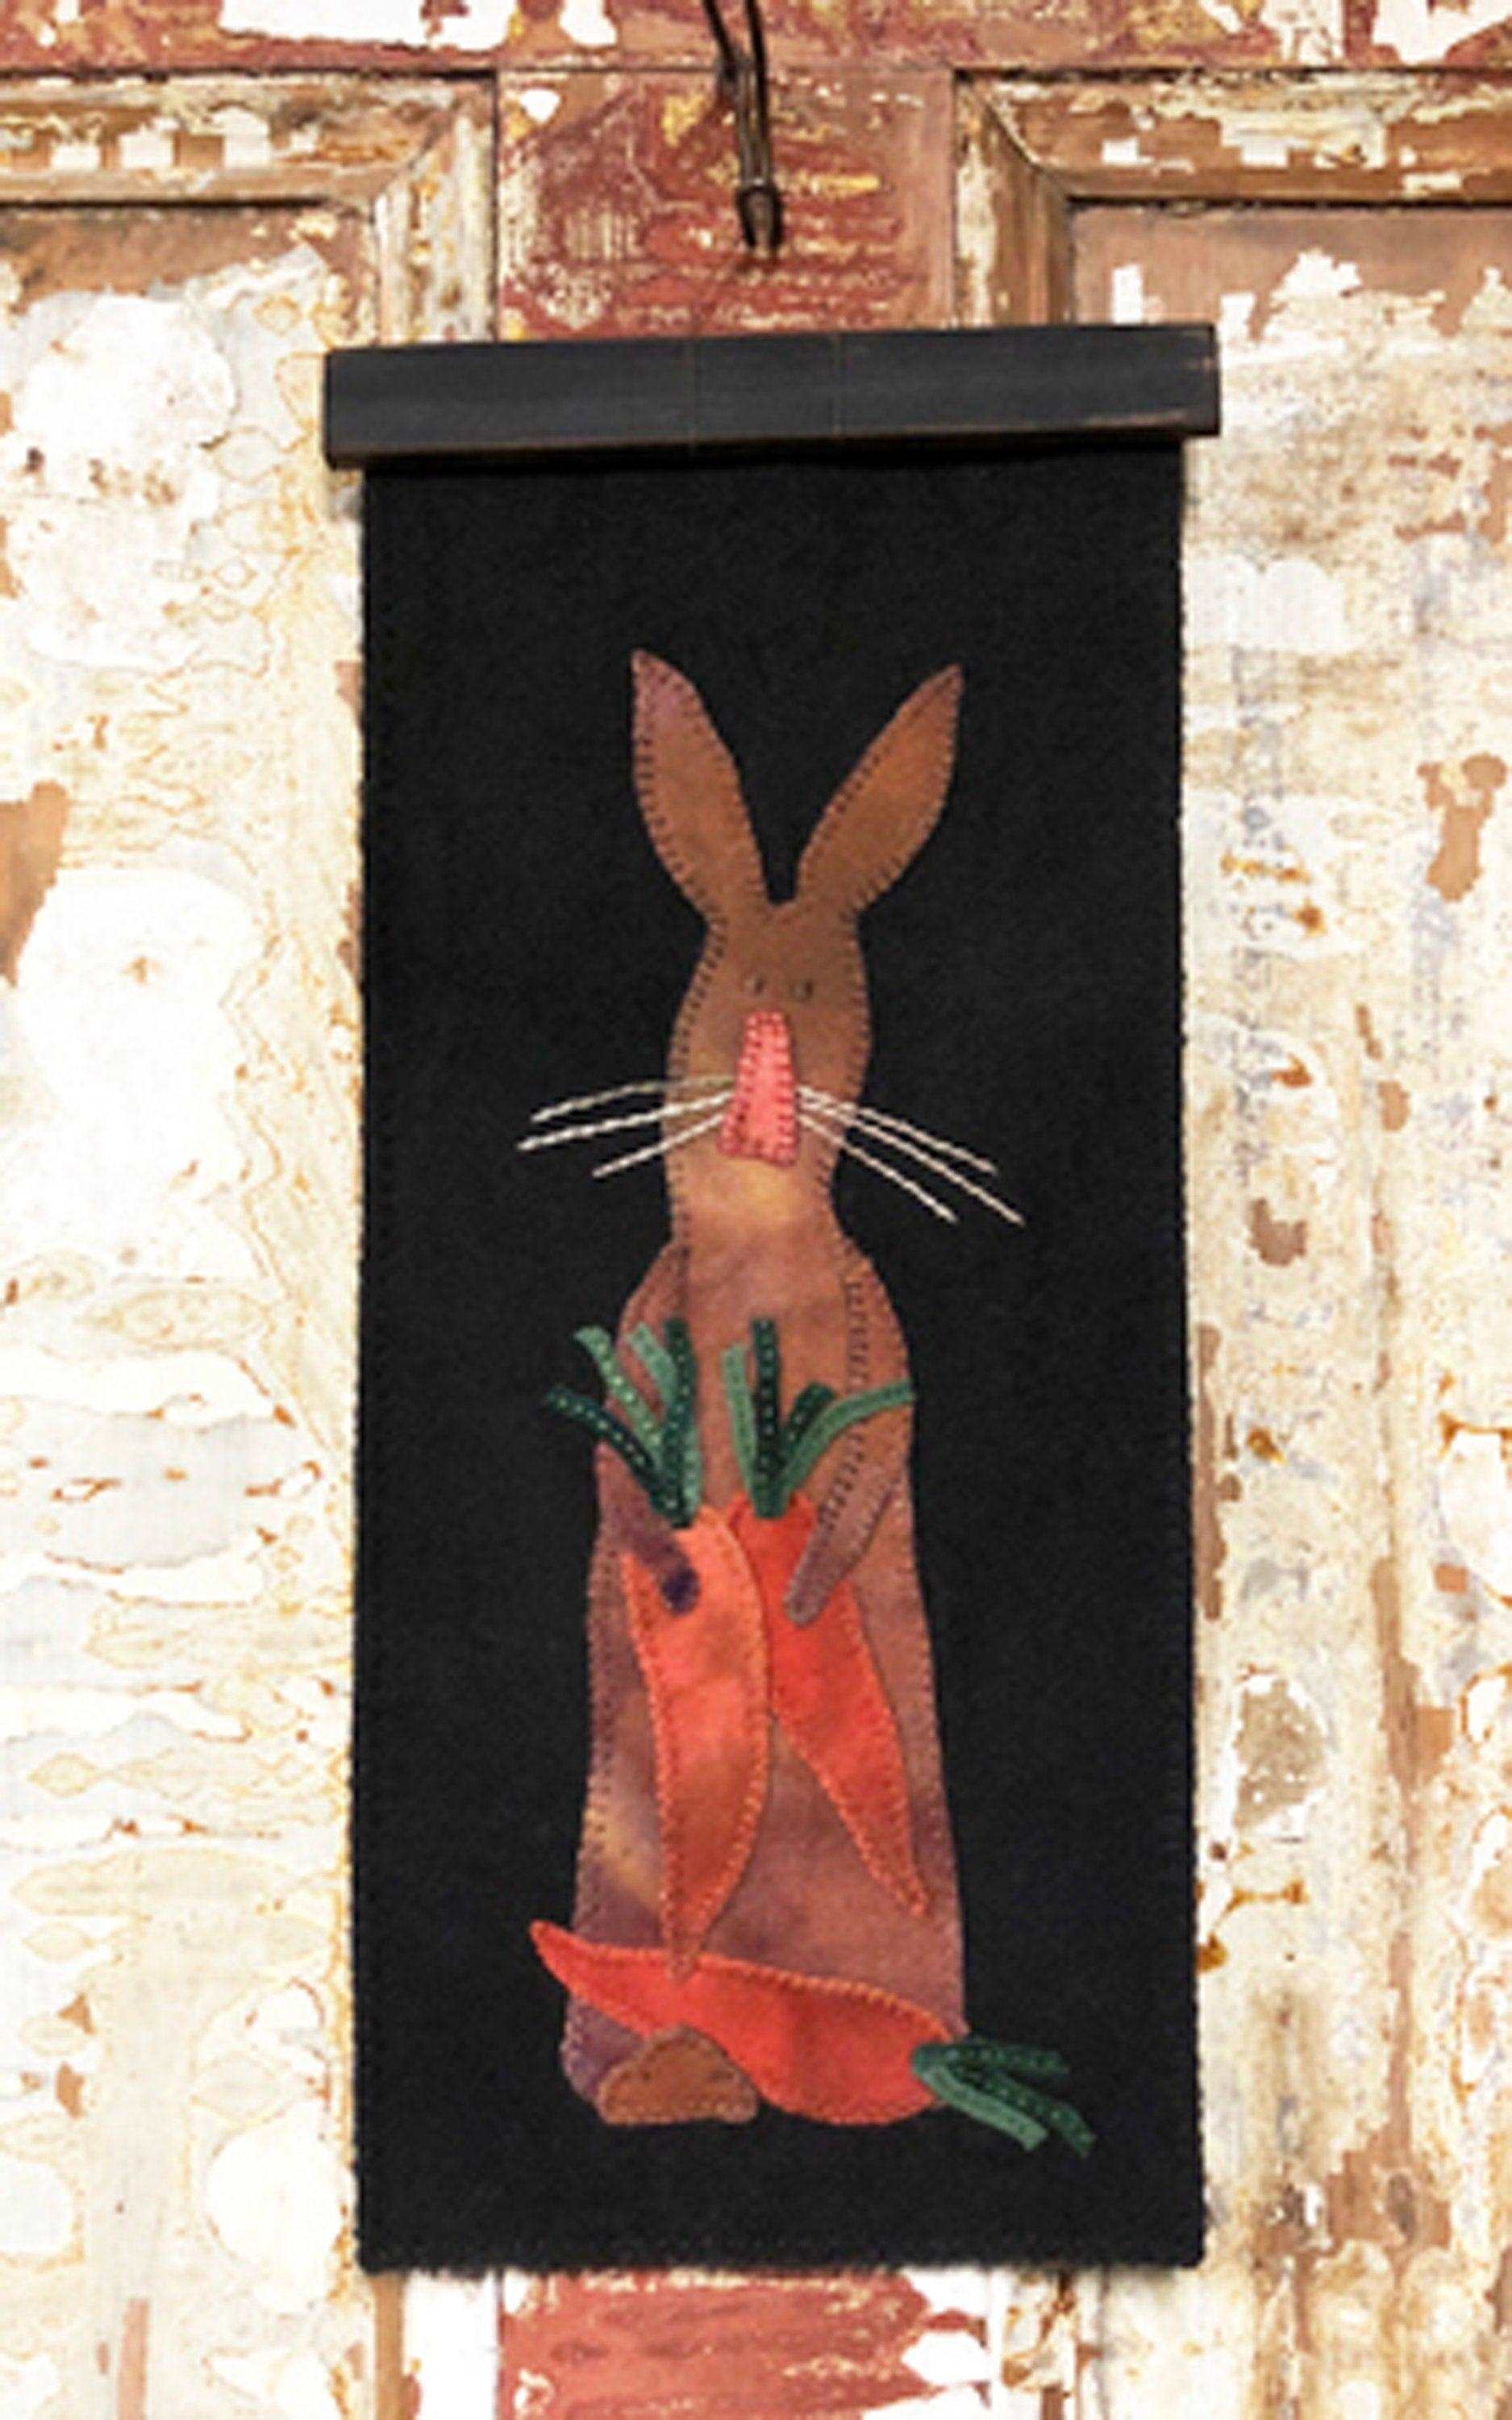 BRINDLE BUNNY Paper Pattern - All About Ewe Wool Shop